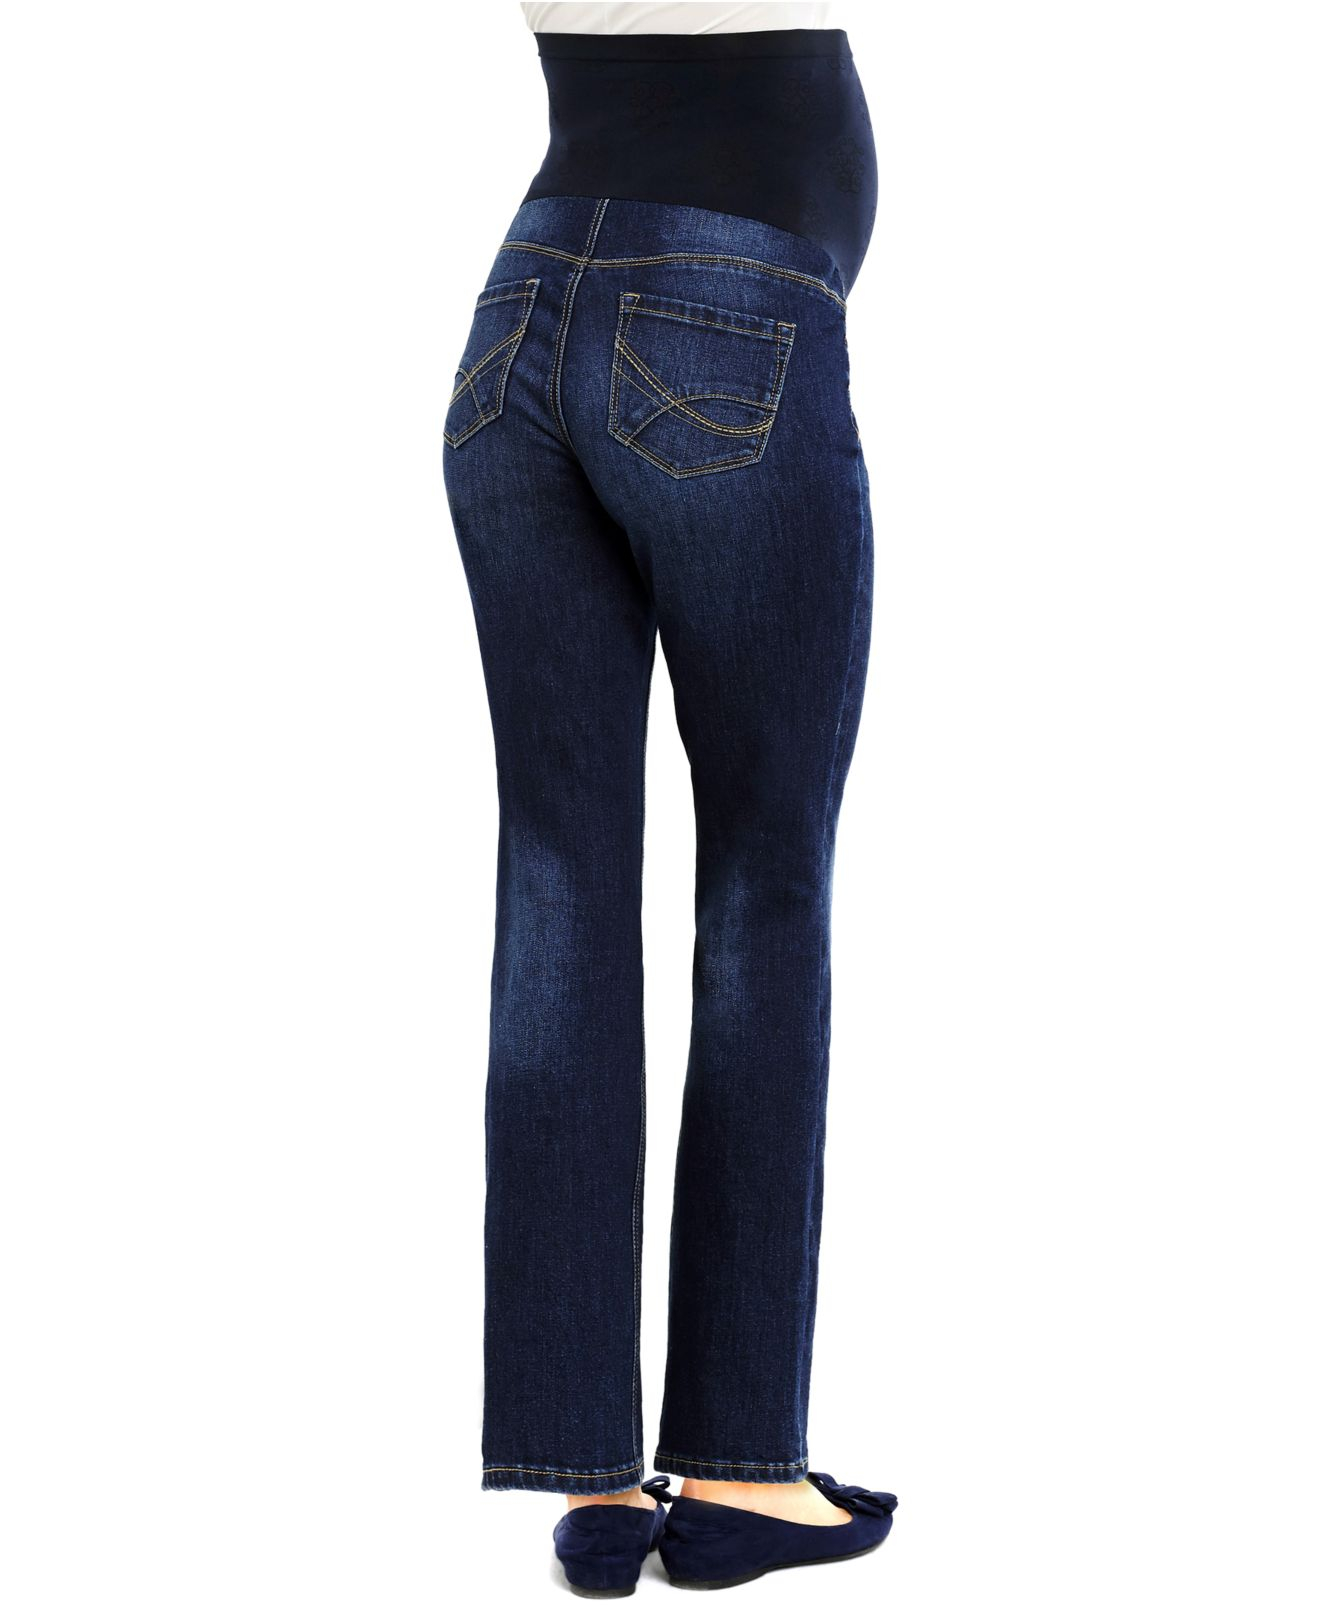 Lyst - Jessica Simpson Maternity Slim Bootcut Jeans in Blue